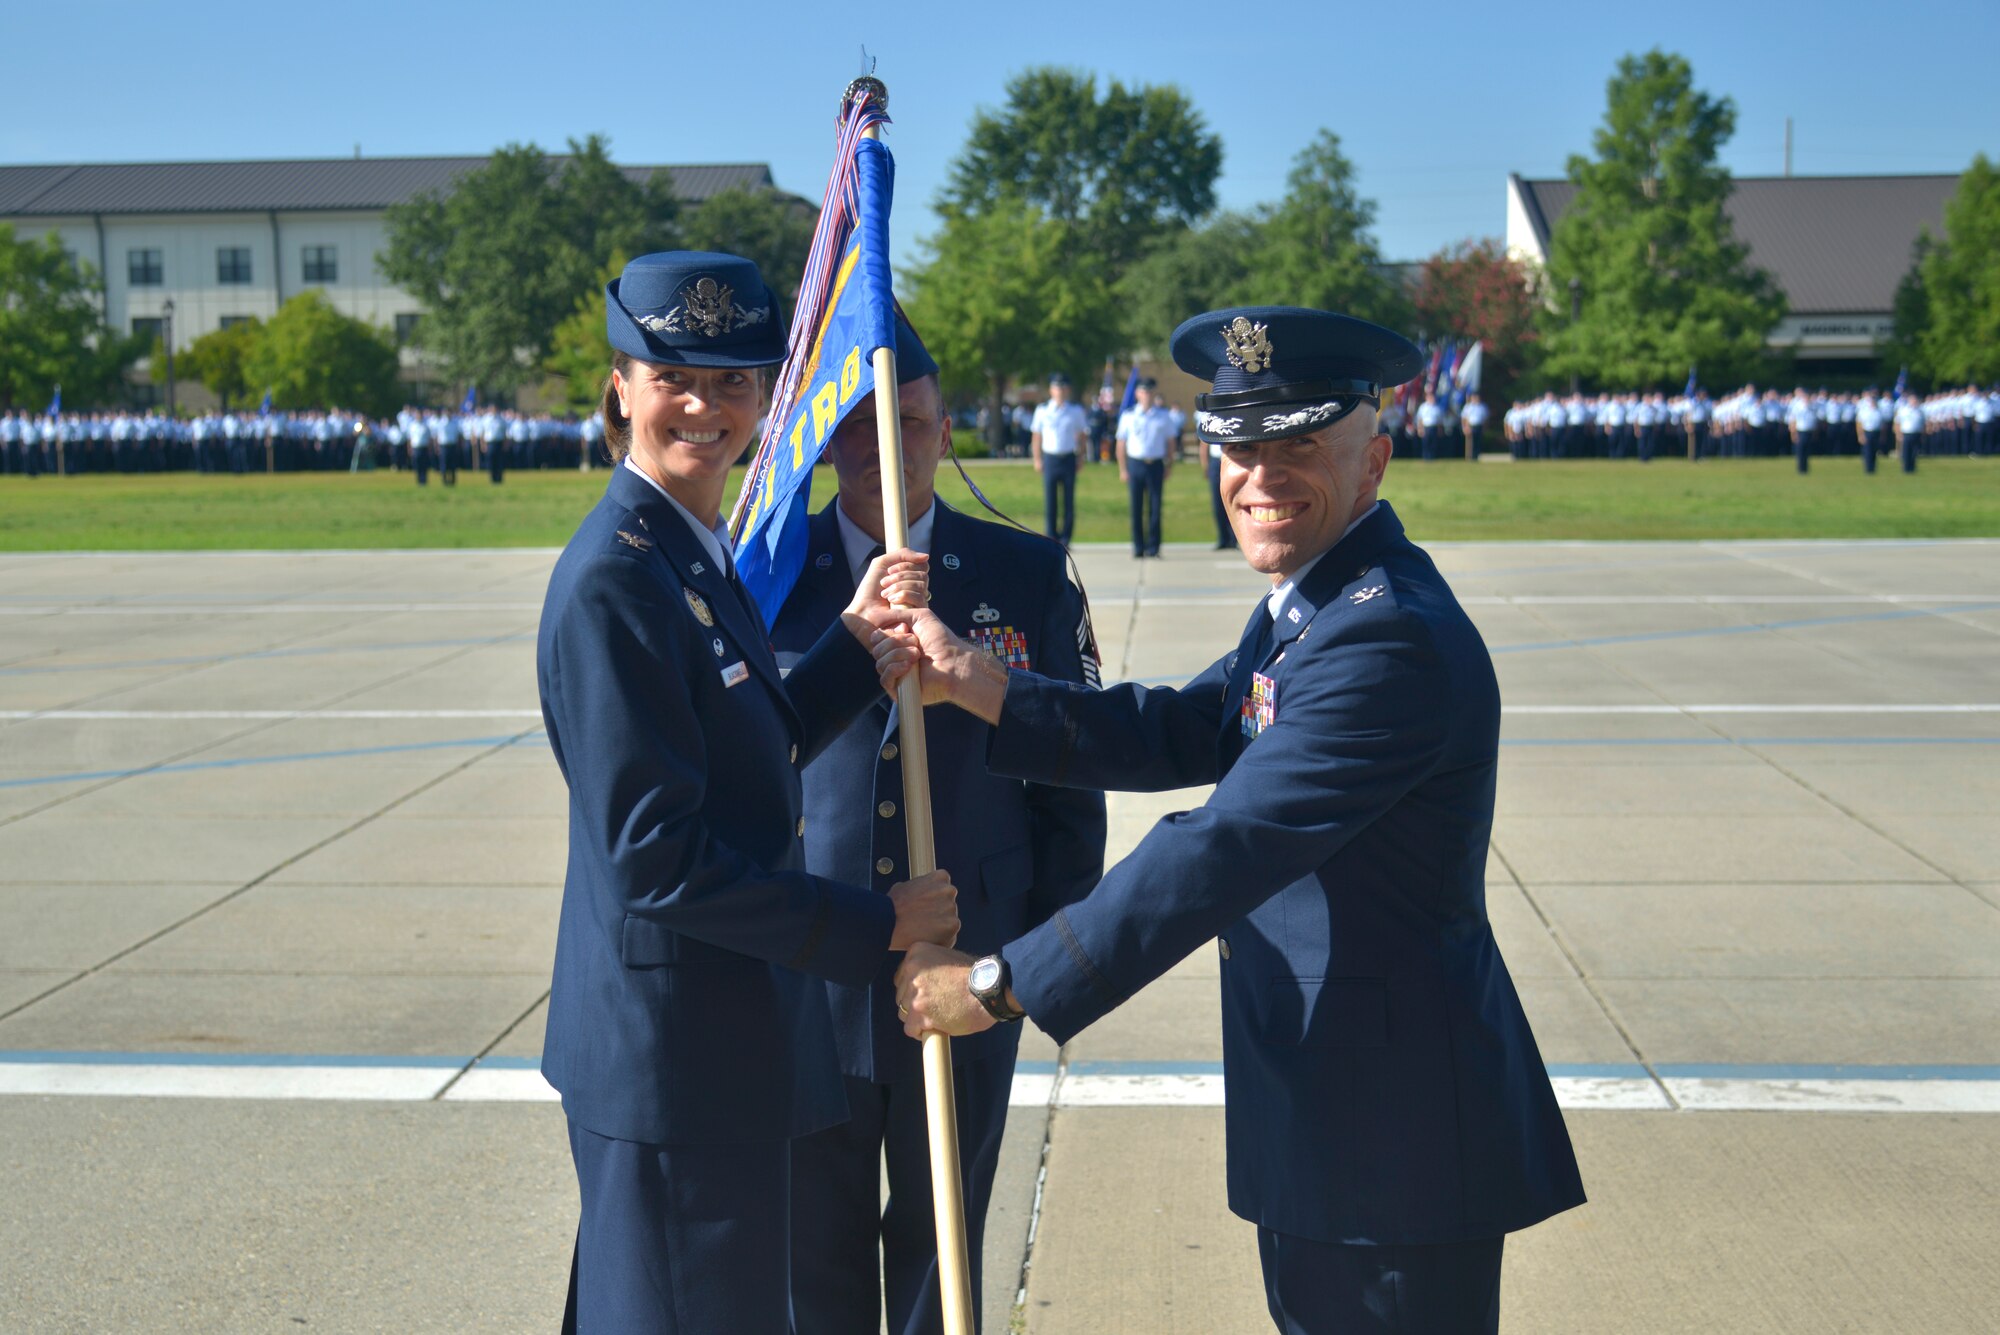 U.S. Air Force Col. Heather Blackwell, 81st Training Wing commander, passes the 81st Training Group guidon to Col. Chance Geray, 81st TRG commander, during the 81st TRG change of command ceremony at the Levitow Training Support Facility drill pad at Keesler Air Force Base, Mississippi, July 1, 2019. The passing of the guidon is a ceremonial symbol of exchanging command from one commander to another. Geray assumed command of the 81st Training Group from Col. Leo Lawson Jr., outgoing 81st TRG commander. (U.S. Air Force photo by Airman Seth Haddix)